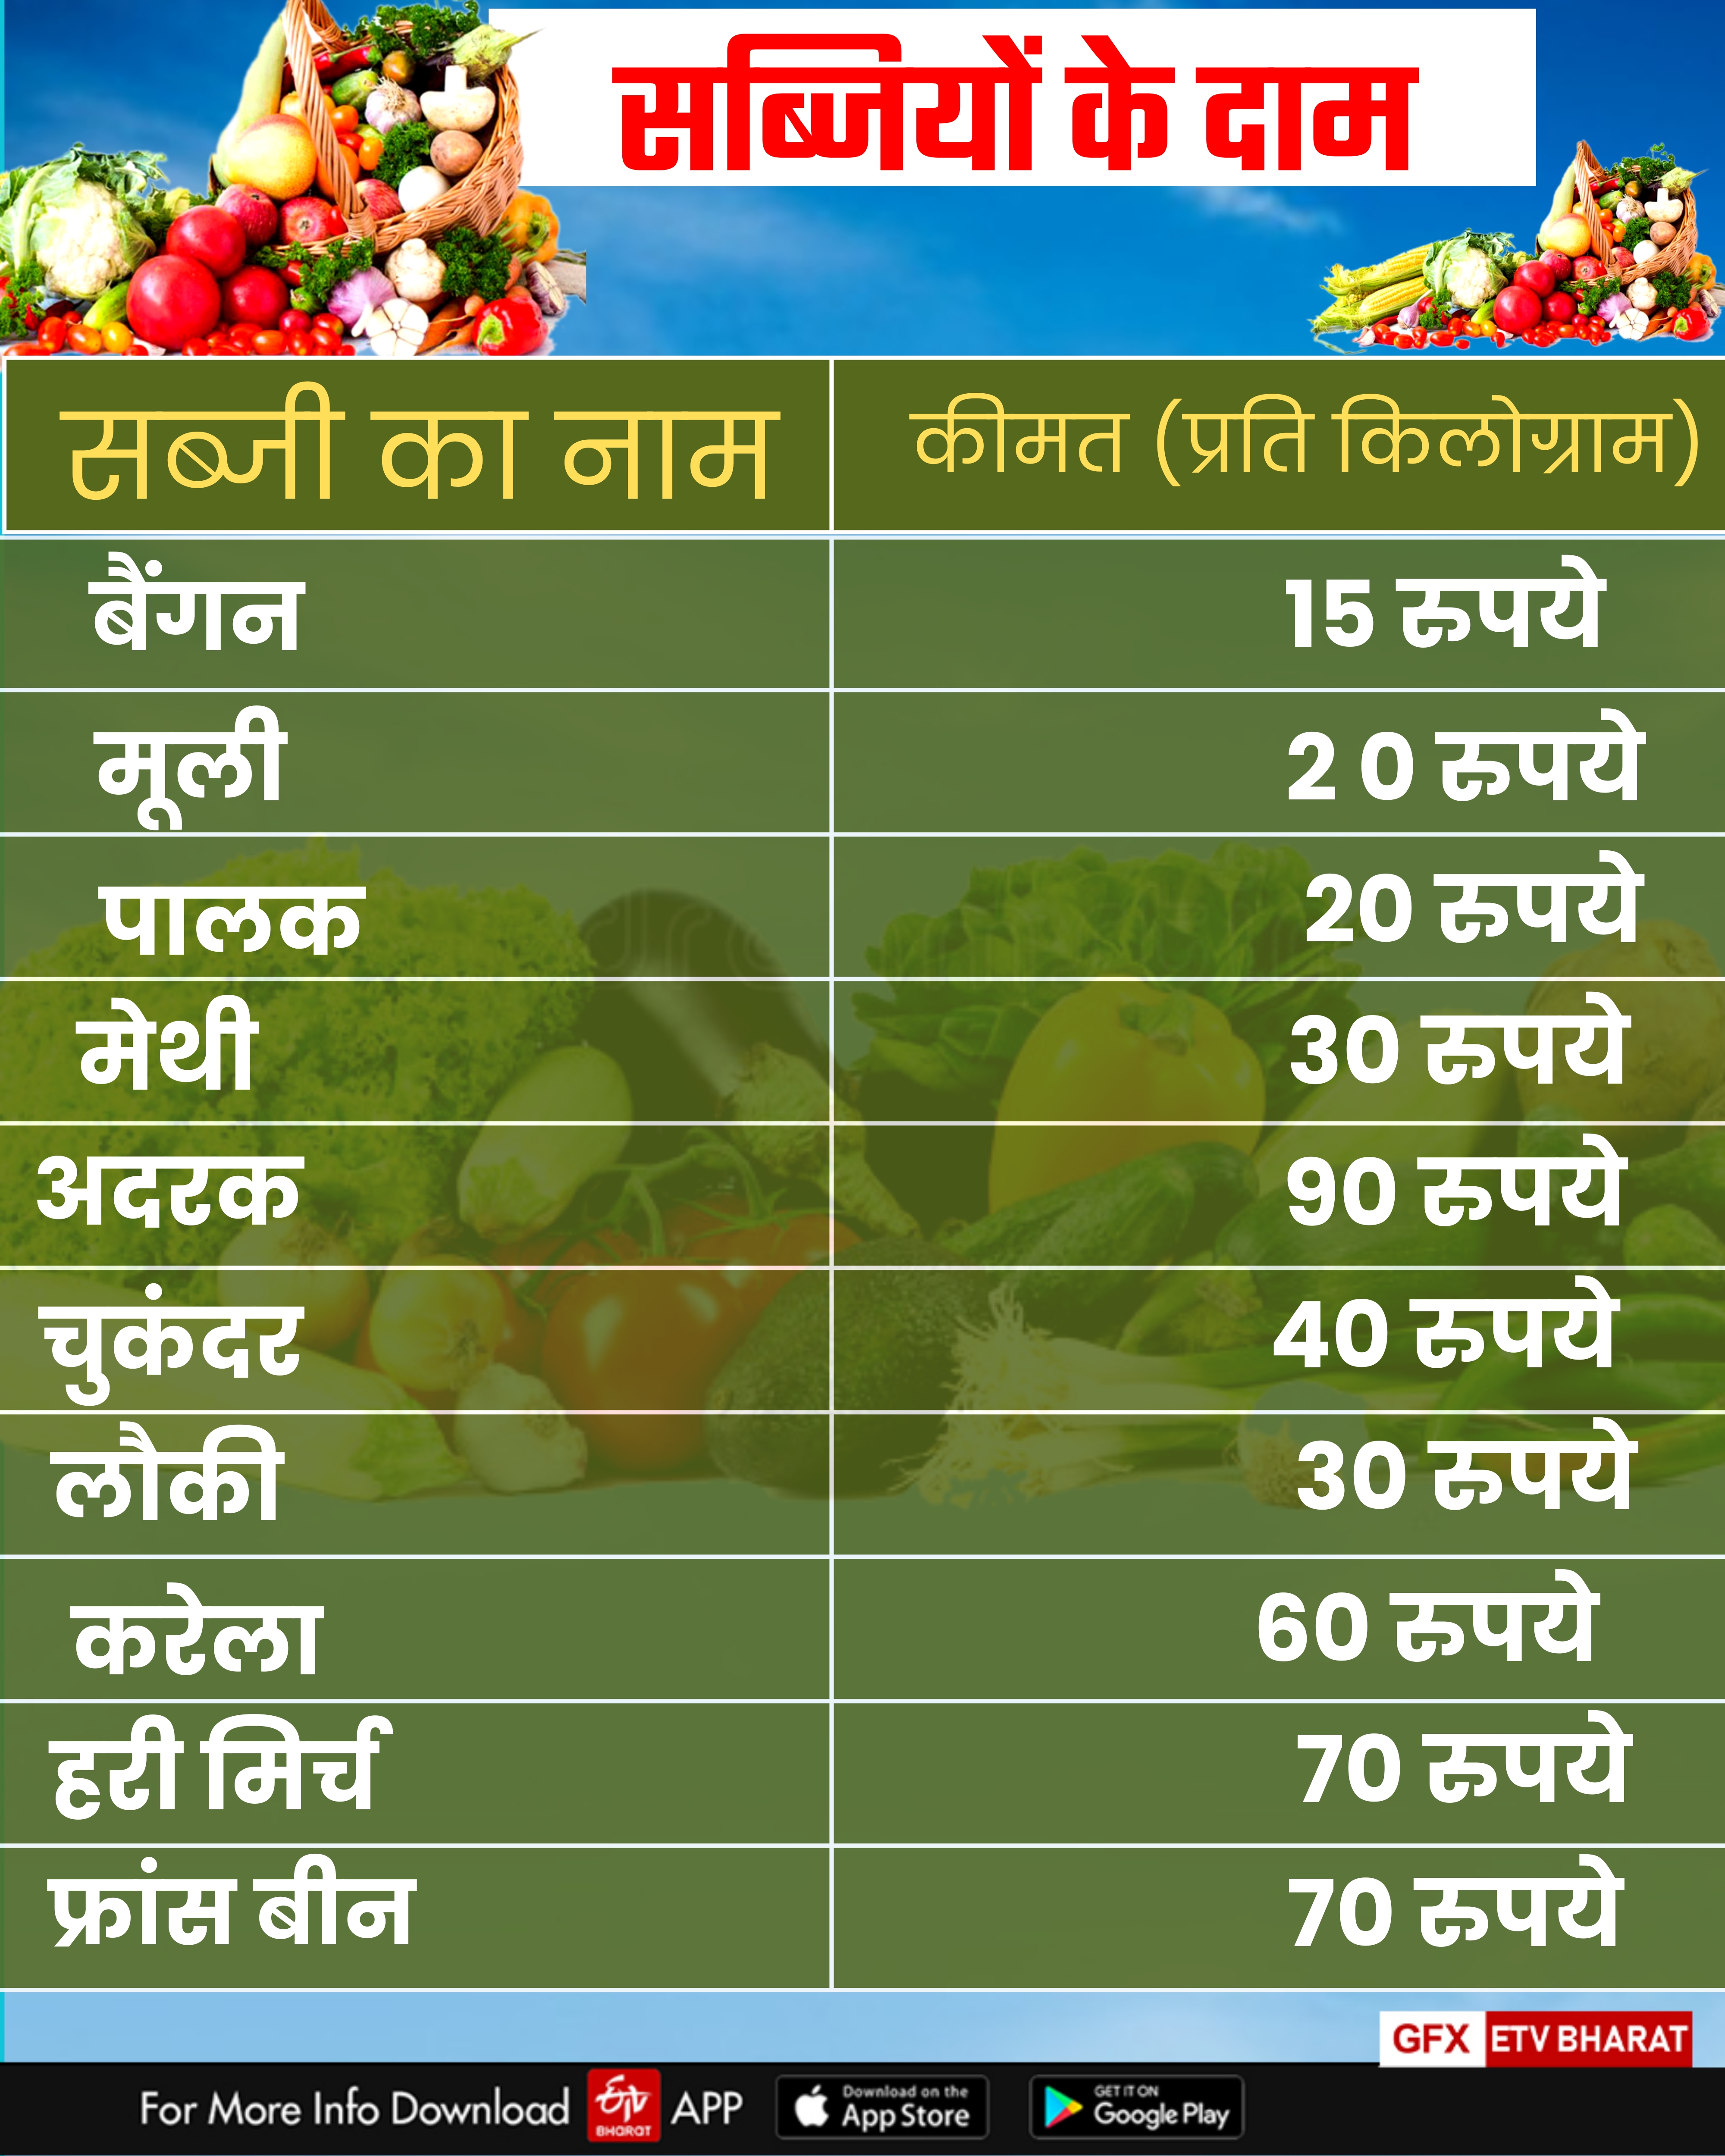 Vegetable prices in Haryana